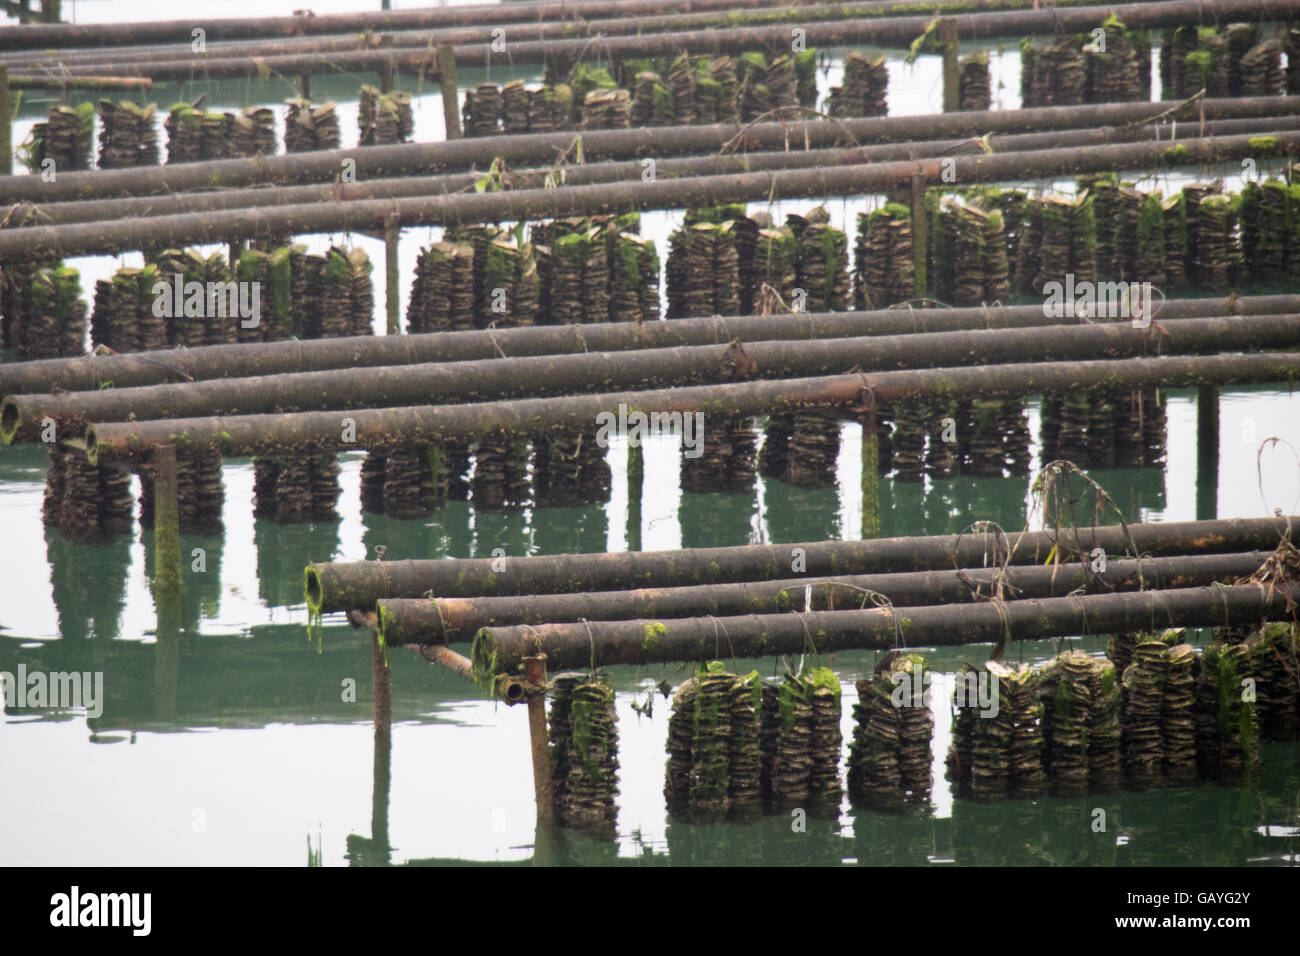 Oyster farming in the Seto Inland Sea, Japan. Stock Photo